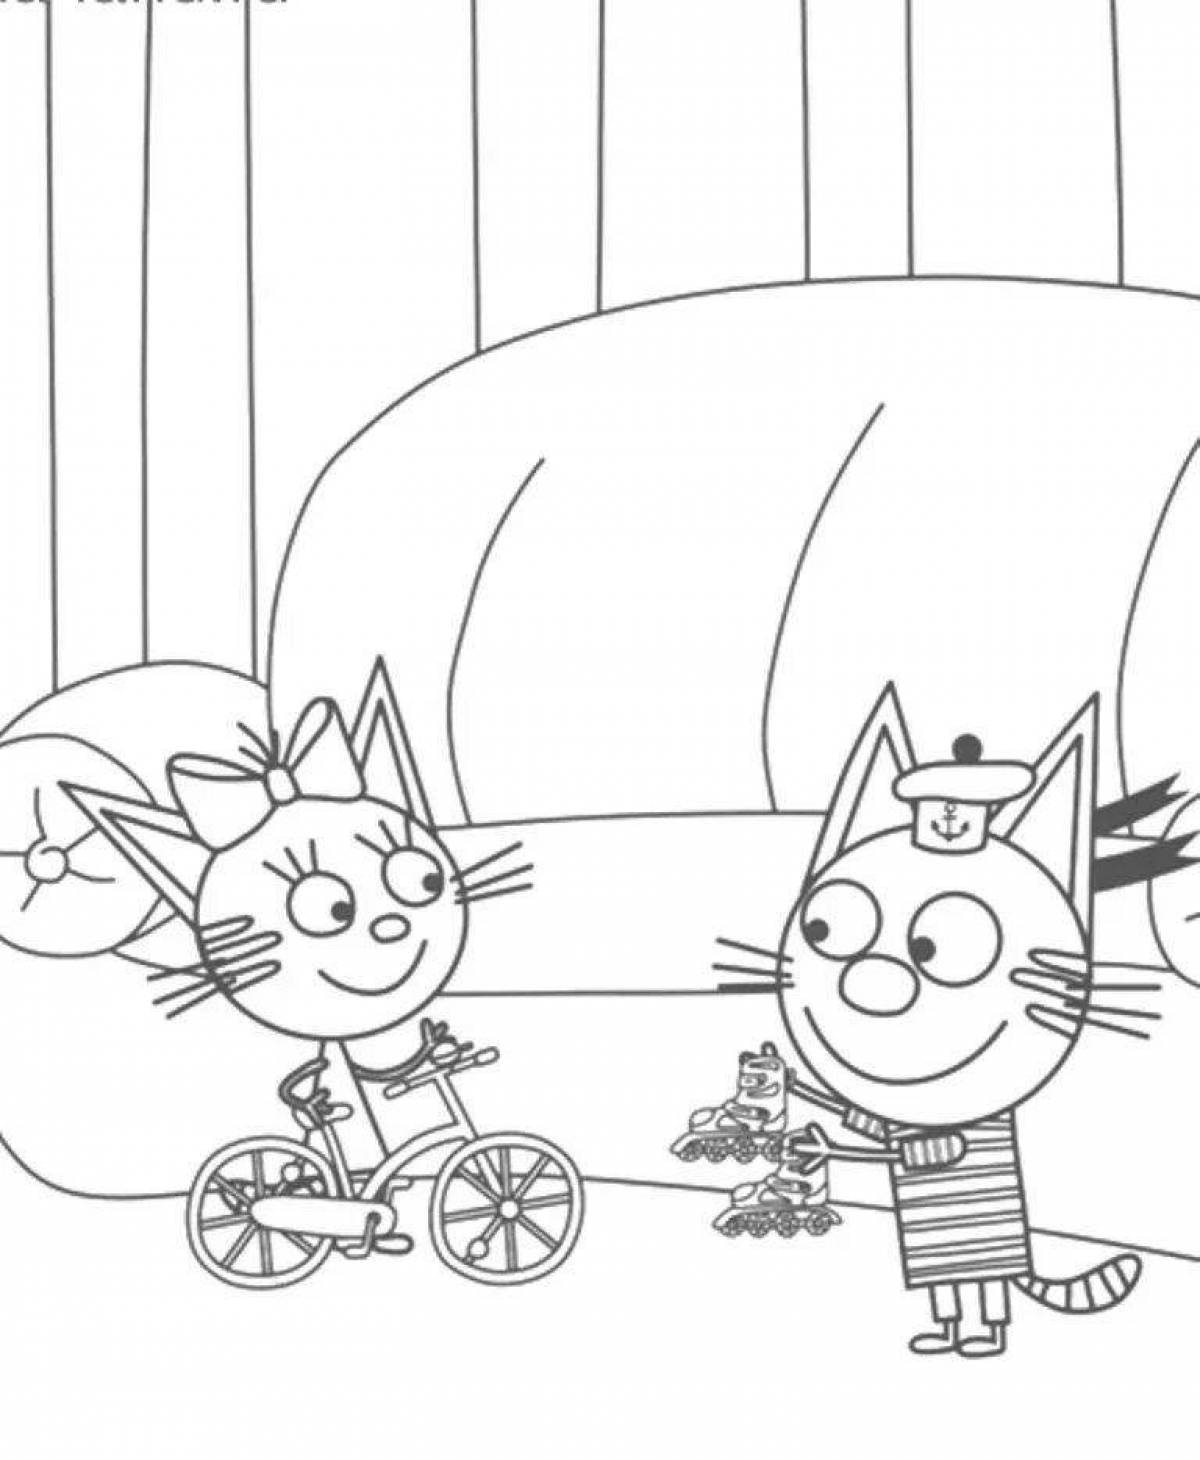 Coloring page energetic pursuit of three cats